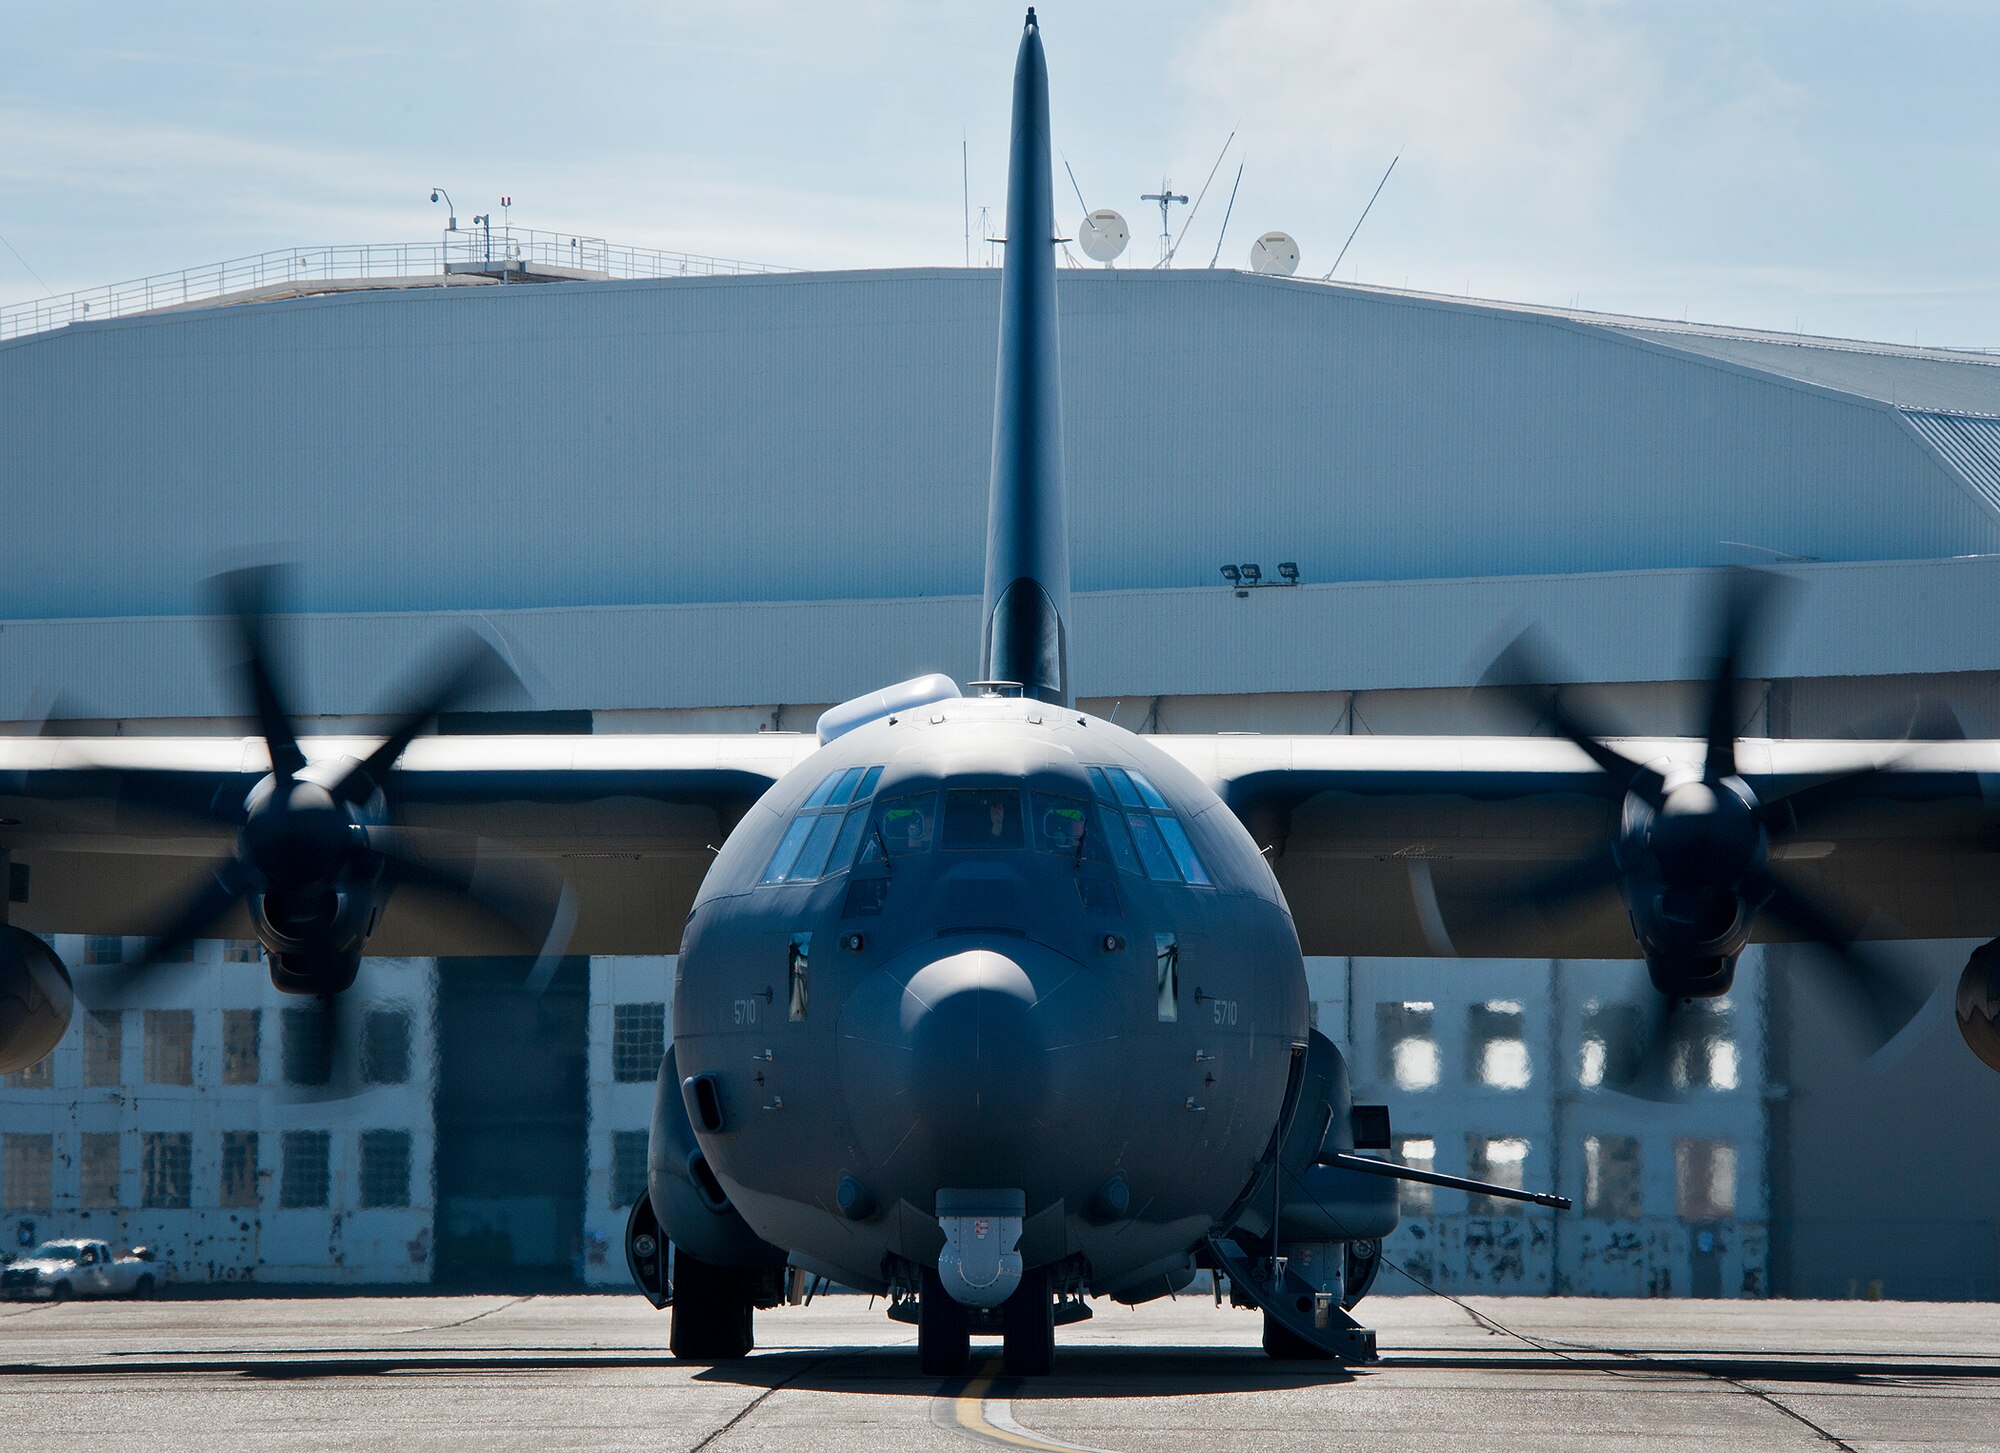 The newly created AC-130J Ghostrider awaits takeoff for its first official sortie Jan. 31 at Eglin Air Force Base, Fla. The Air Force Special Operations Command MC-130J arrived at Eglin in January 2013 to begin the modification process for the AC-130J, whose primary mission is close air support, air interdiction and armed reconnaissance. A total of 32 MC-130J prototypes will be modified as part of a $2.4 billion AC-130J program to grow the future fleet. (U.S. Air Force photo/Sara Vidoni)